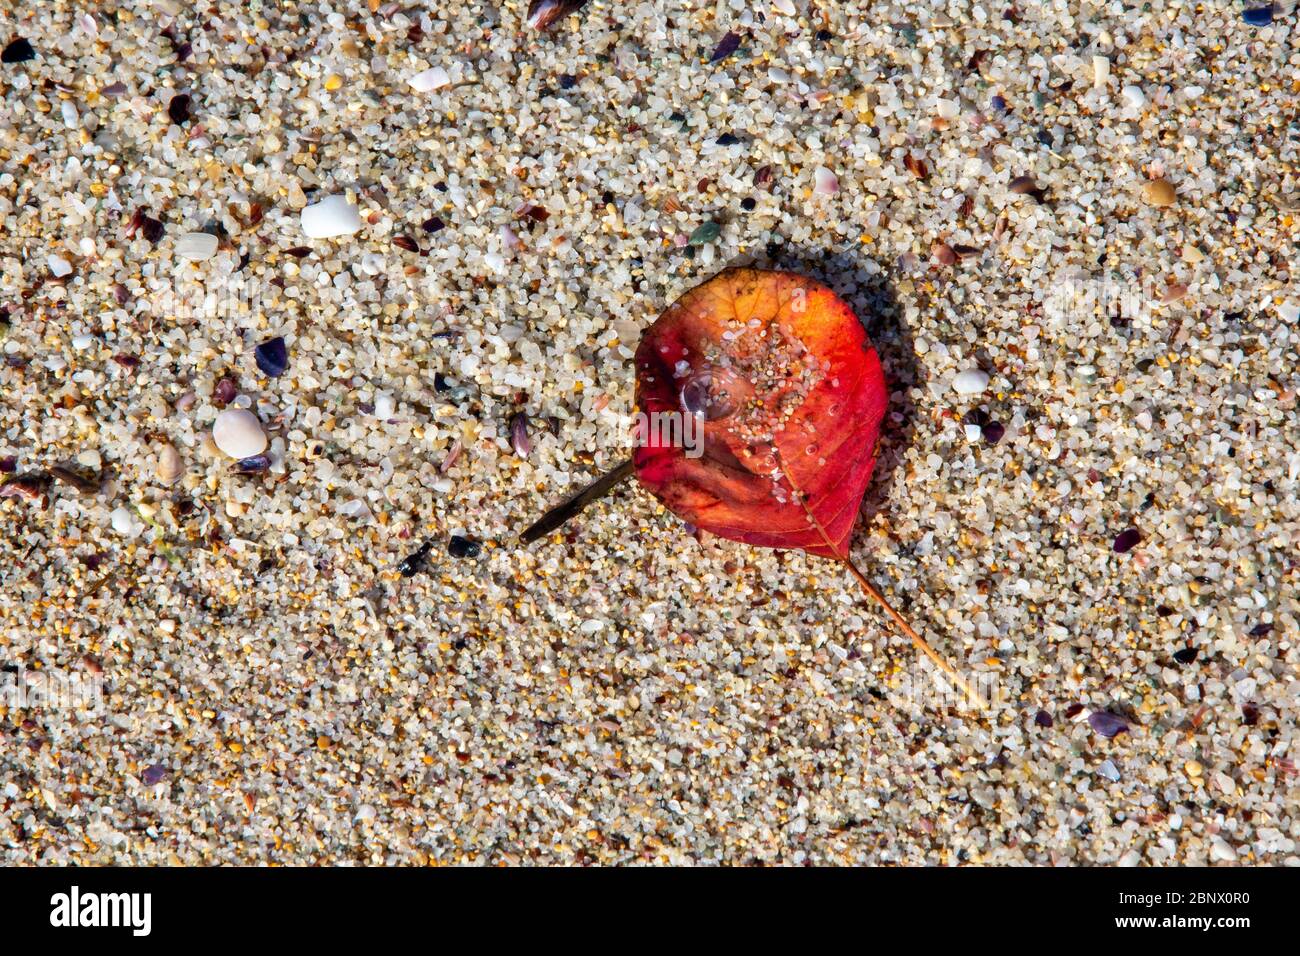 Yellowed red leaf and fallen into the sand of the beach. Stock Photo